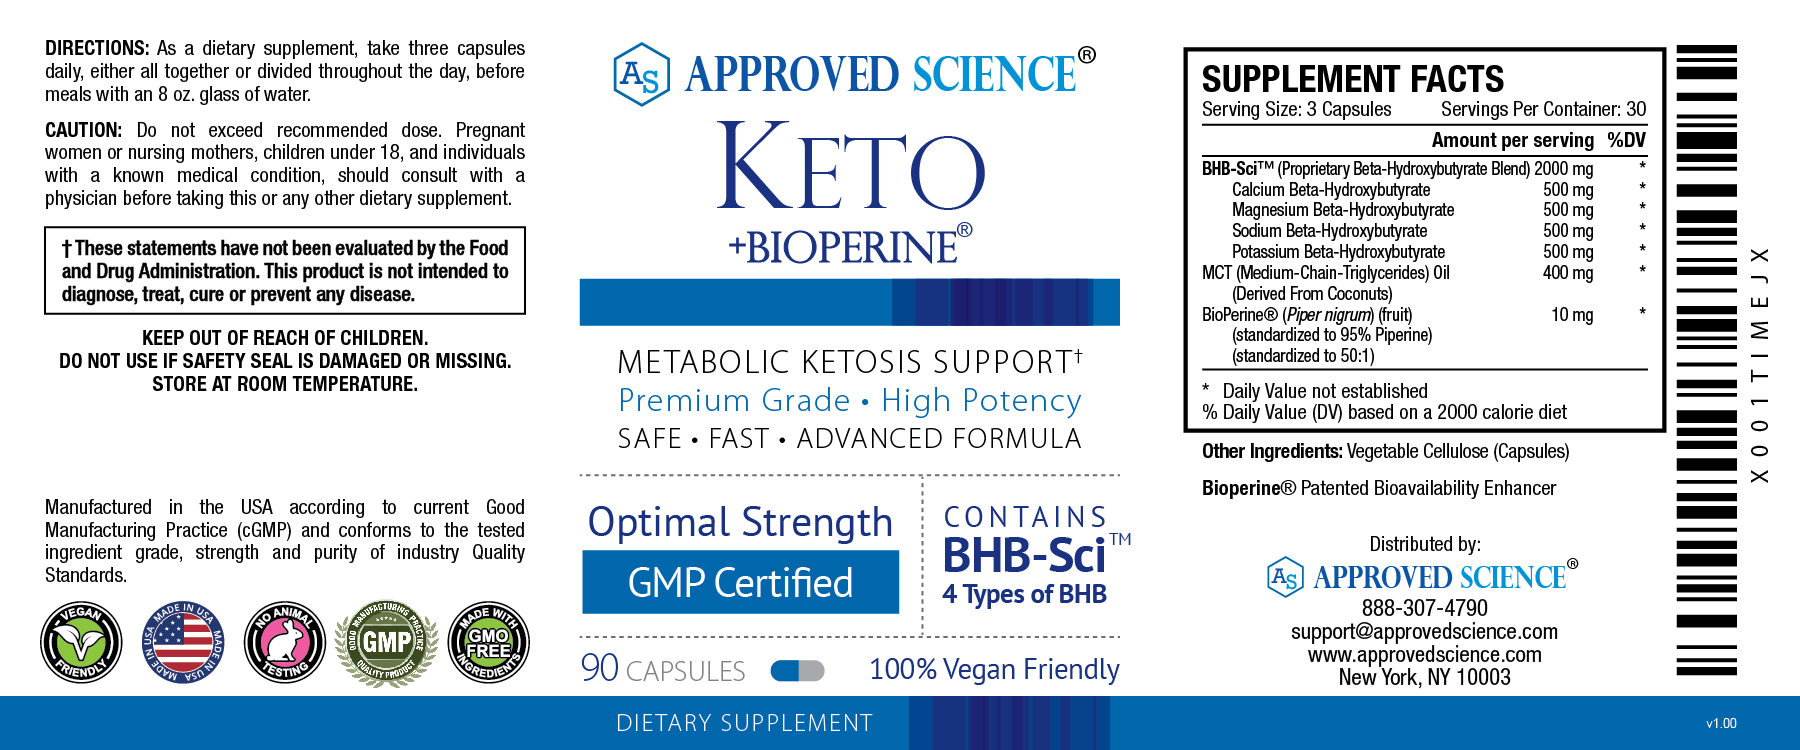 Approved Science Keto Supplement Facts